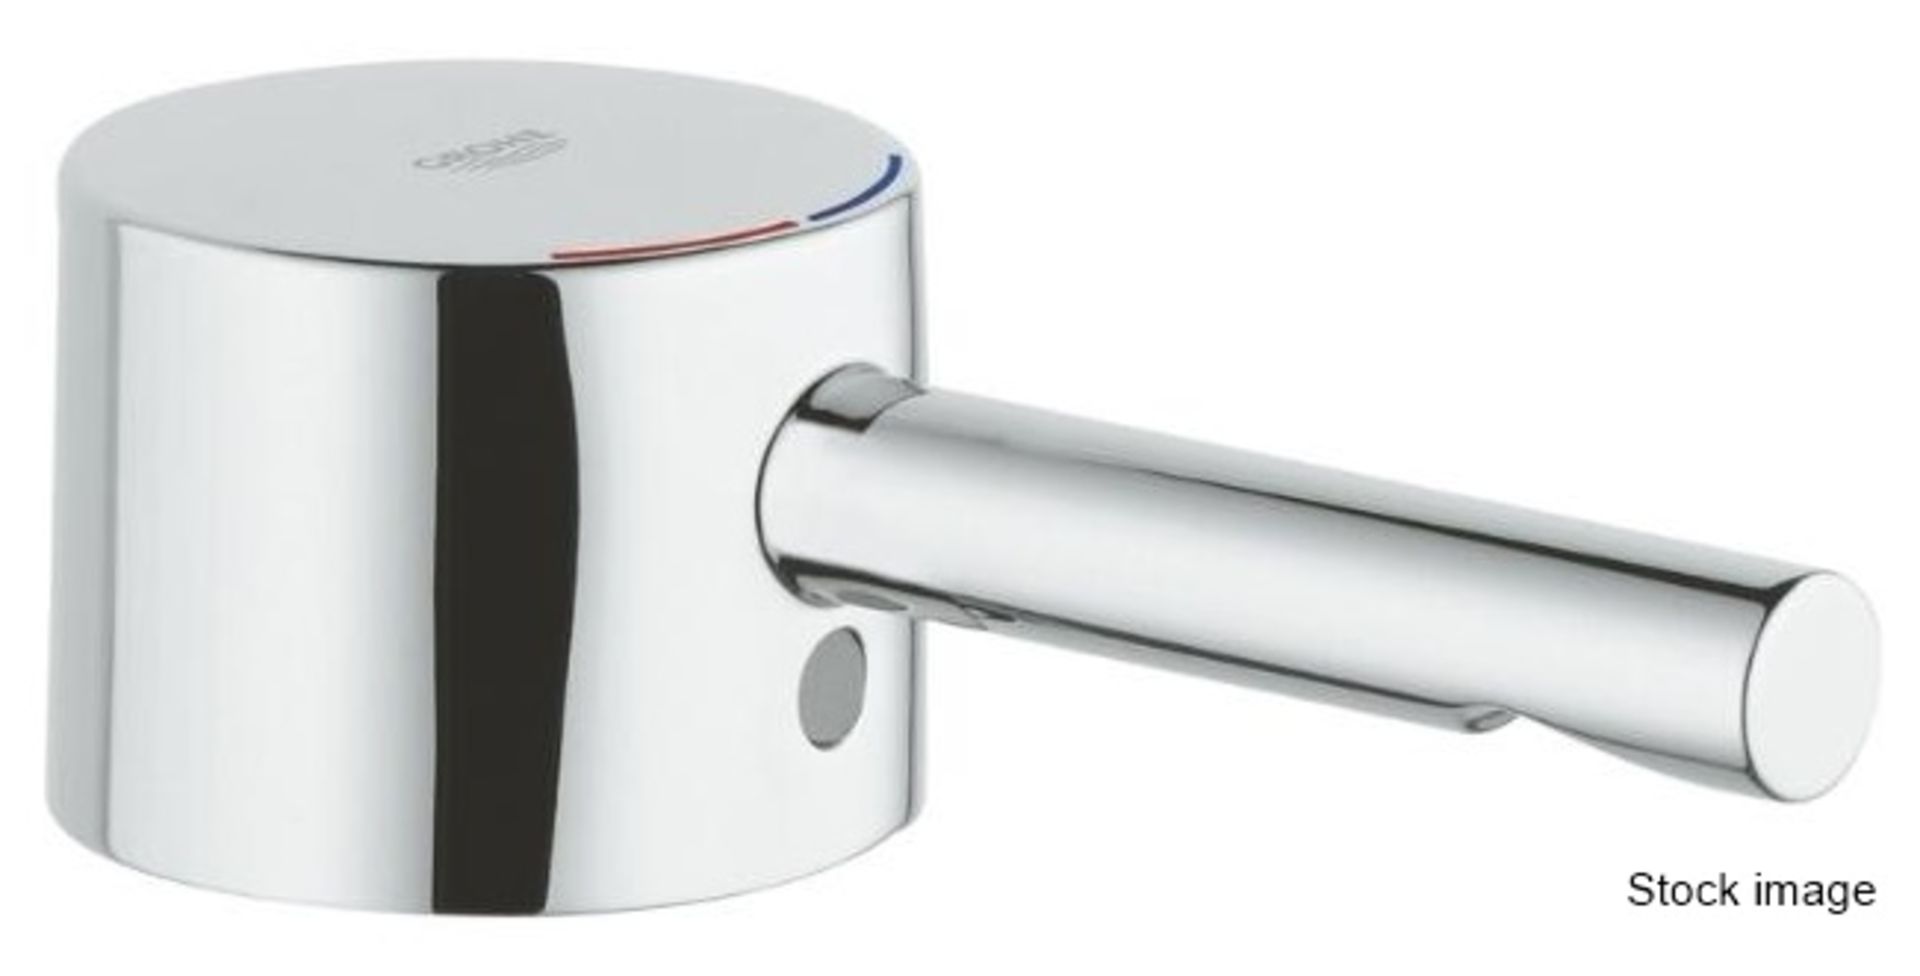 1 x GROHE Tap Lever In Chrome - Ref: 46535000 - New & Boxed Stock - RRP £86.00 - CL406 - Location: